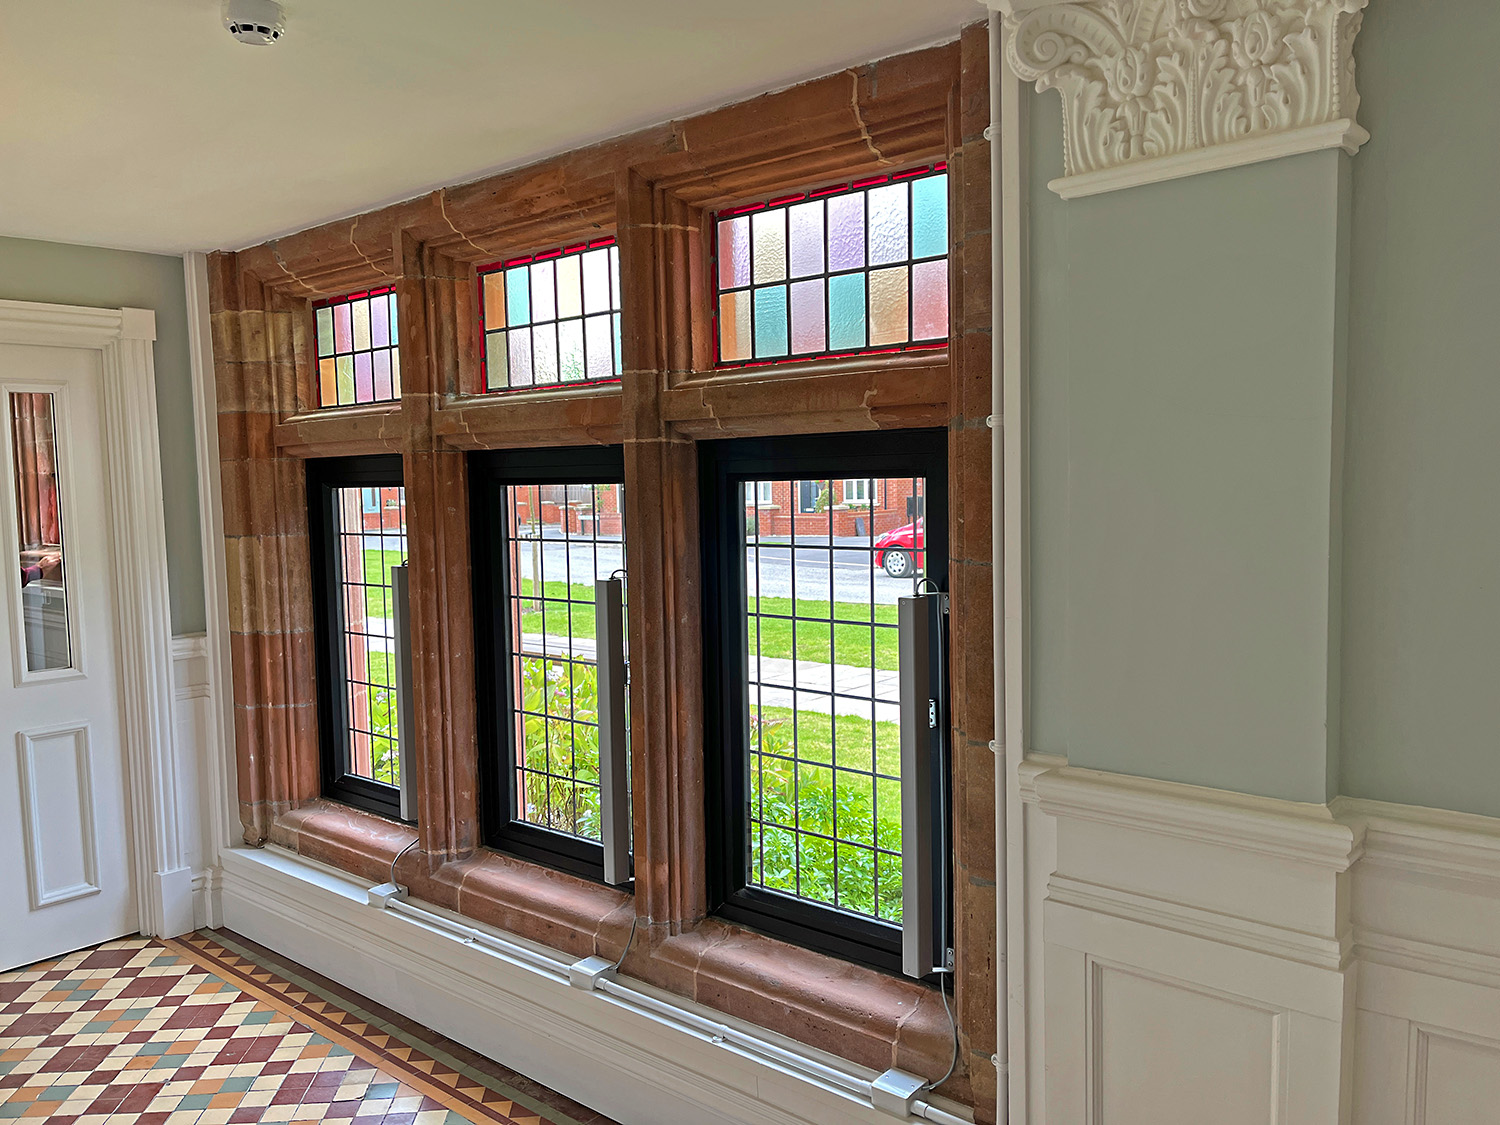 Decorative columns and leaded glass windows were updated and preserved.